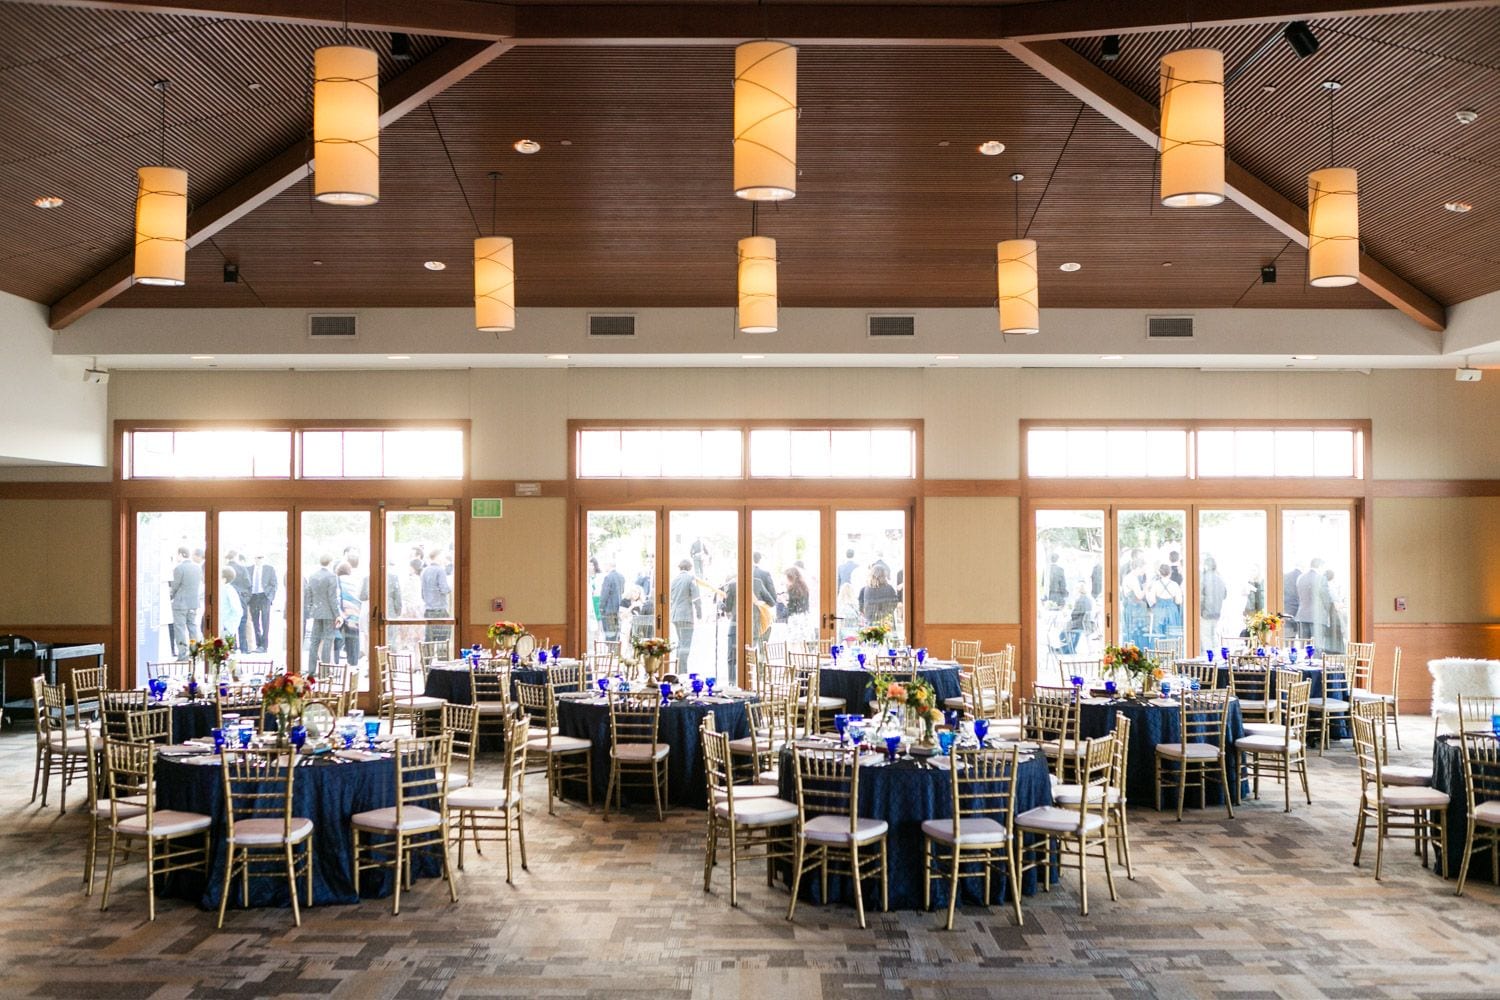 cater weddings and events at coronado community center - view our venue partnerships | snake oil cocktail co.